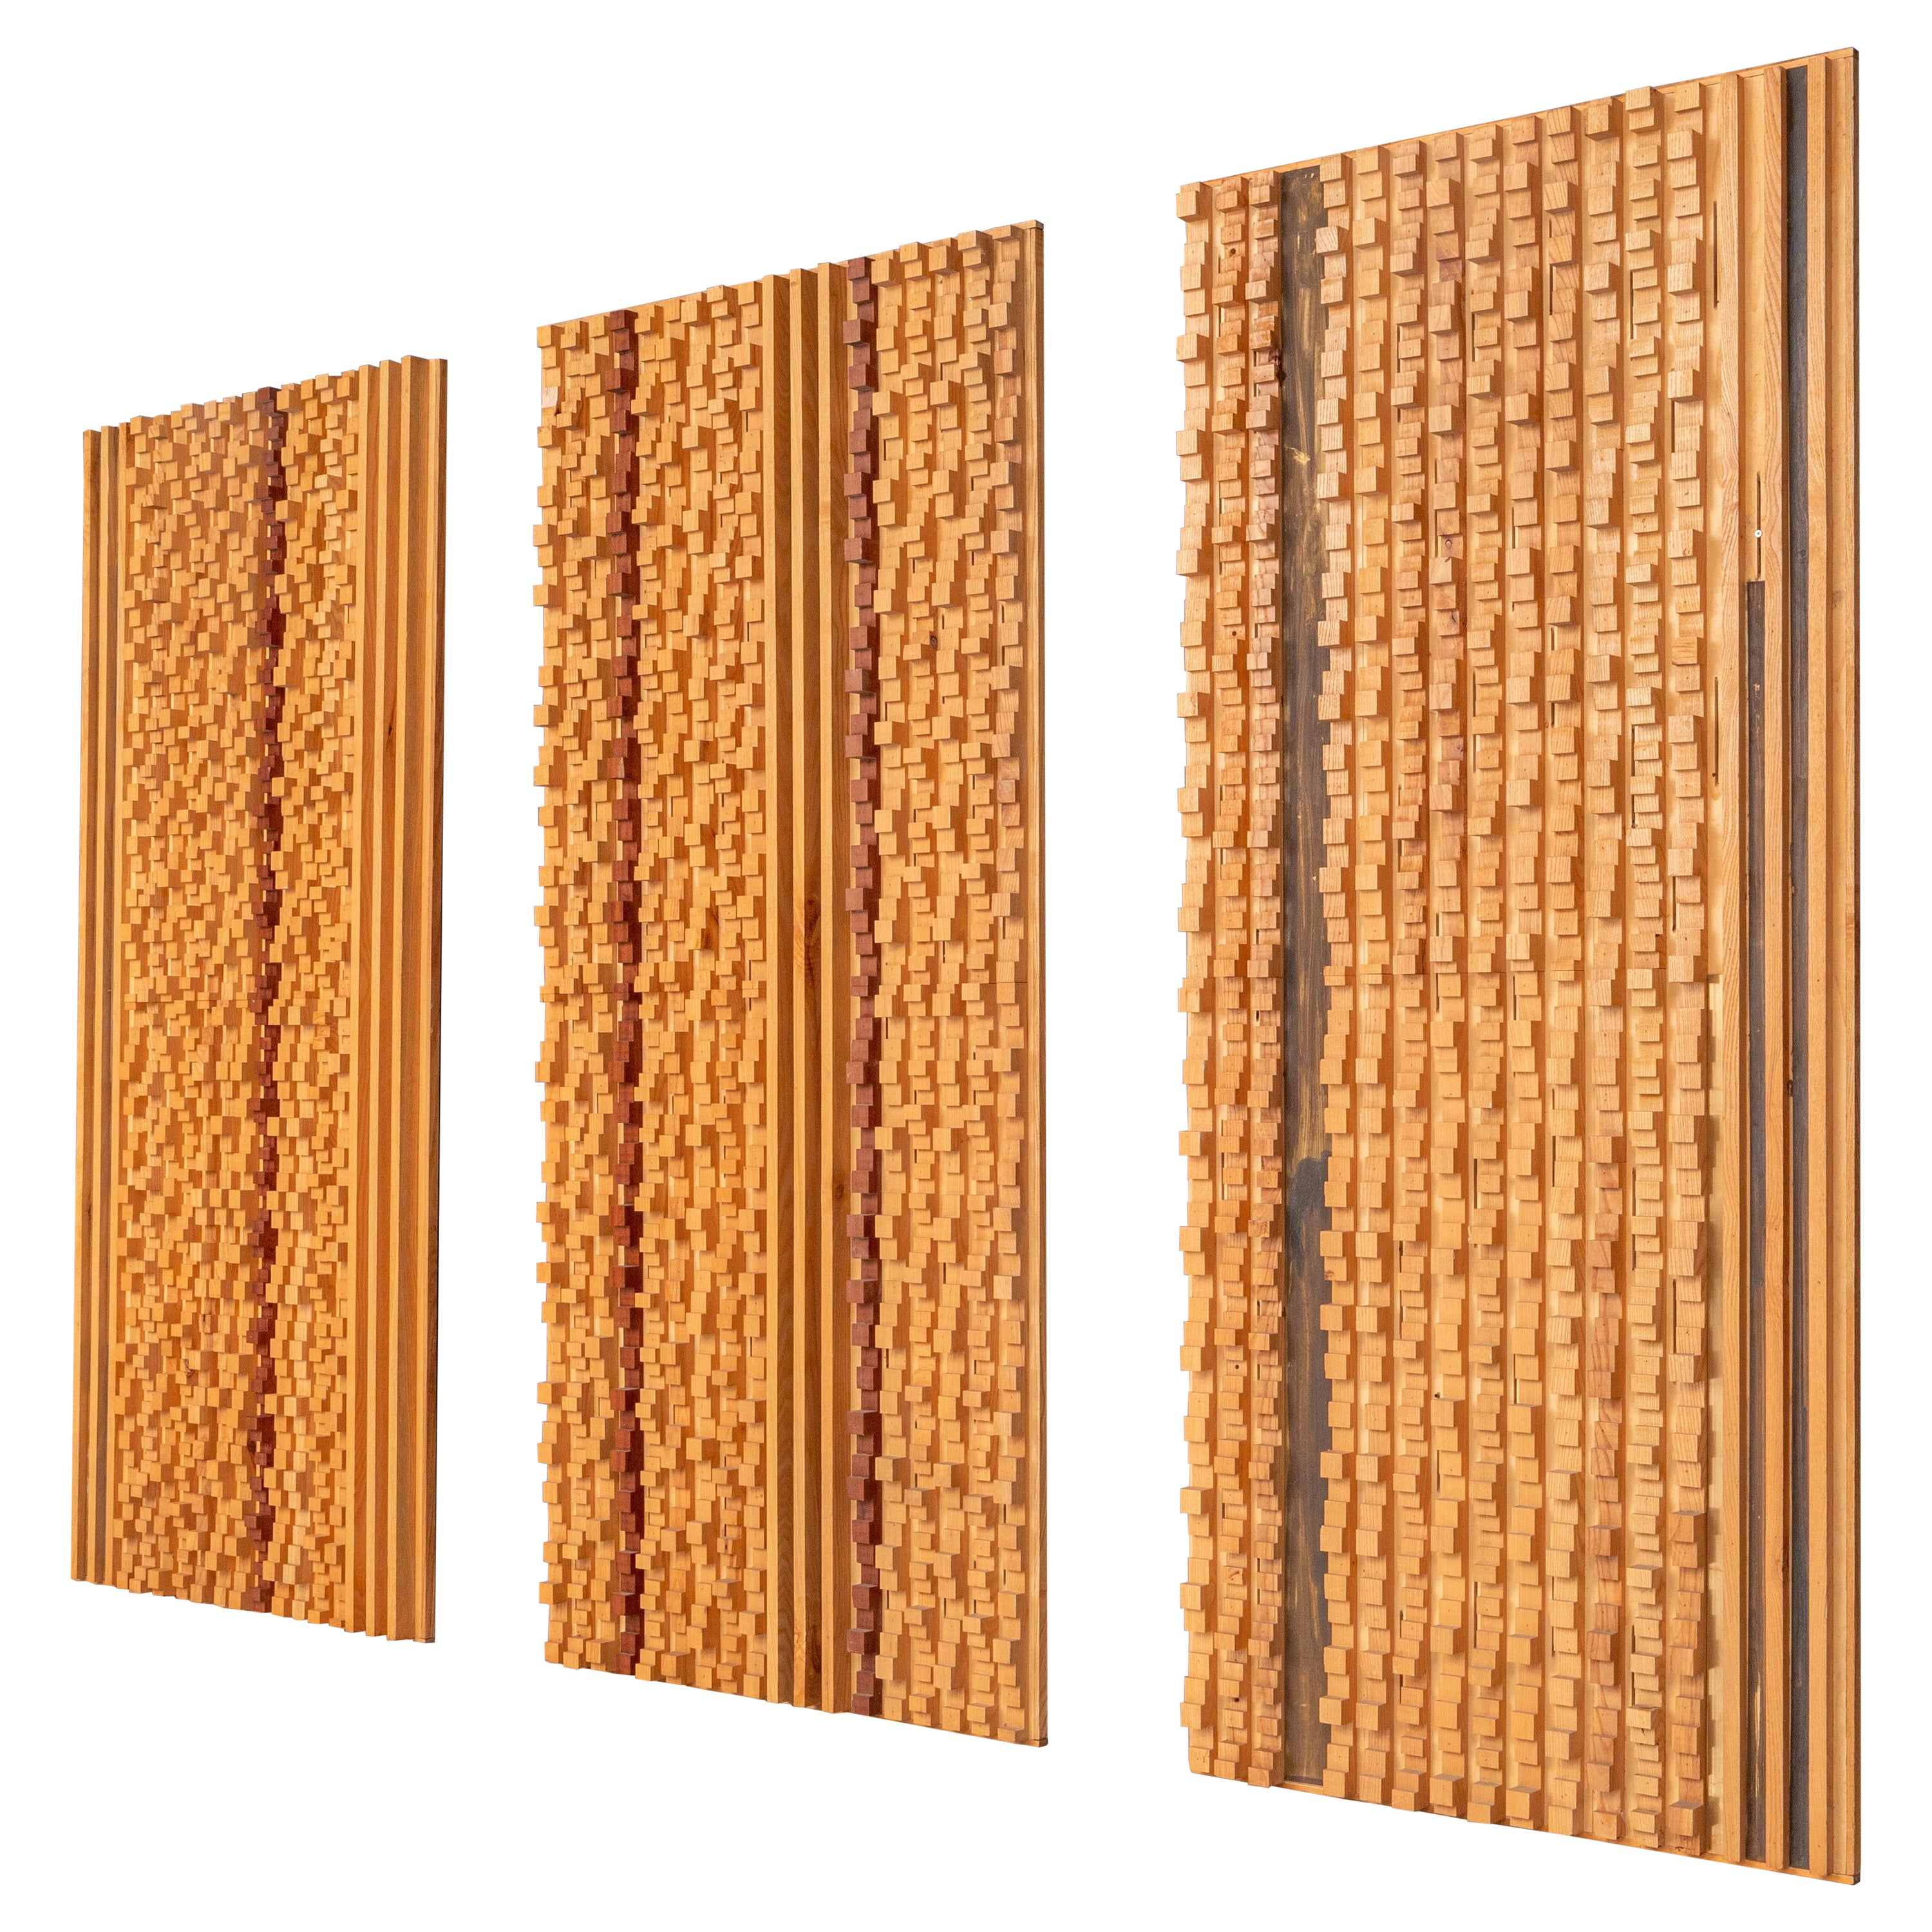 Set of Three Large Wall Panels by Stefano d'Amico, Italy, 1974